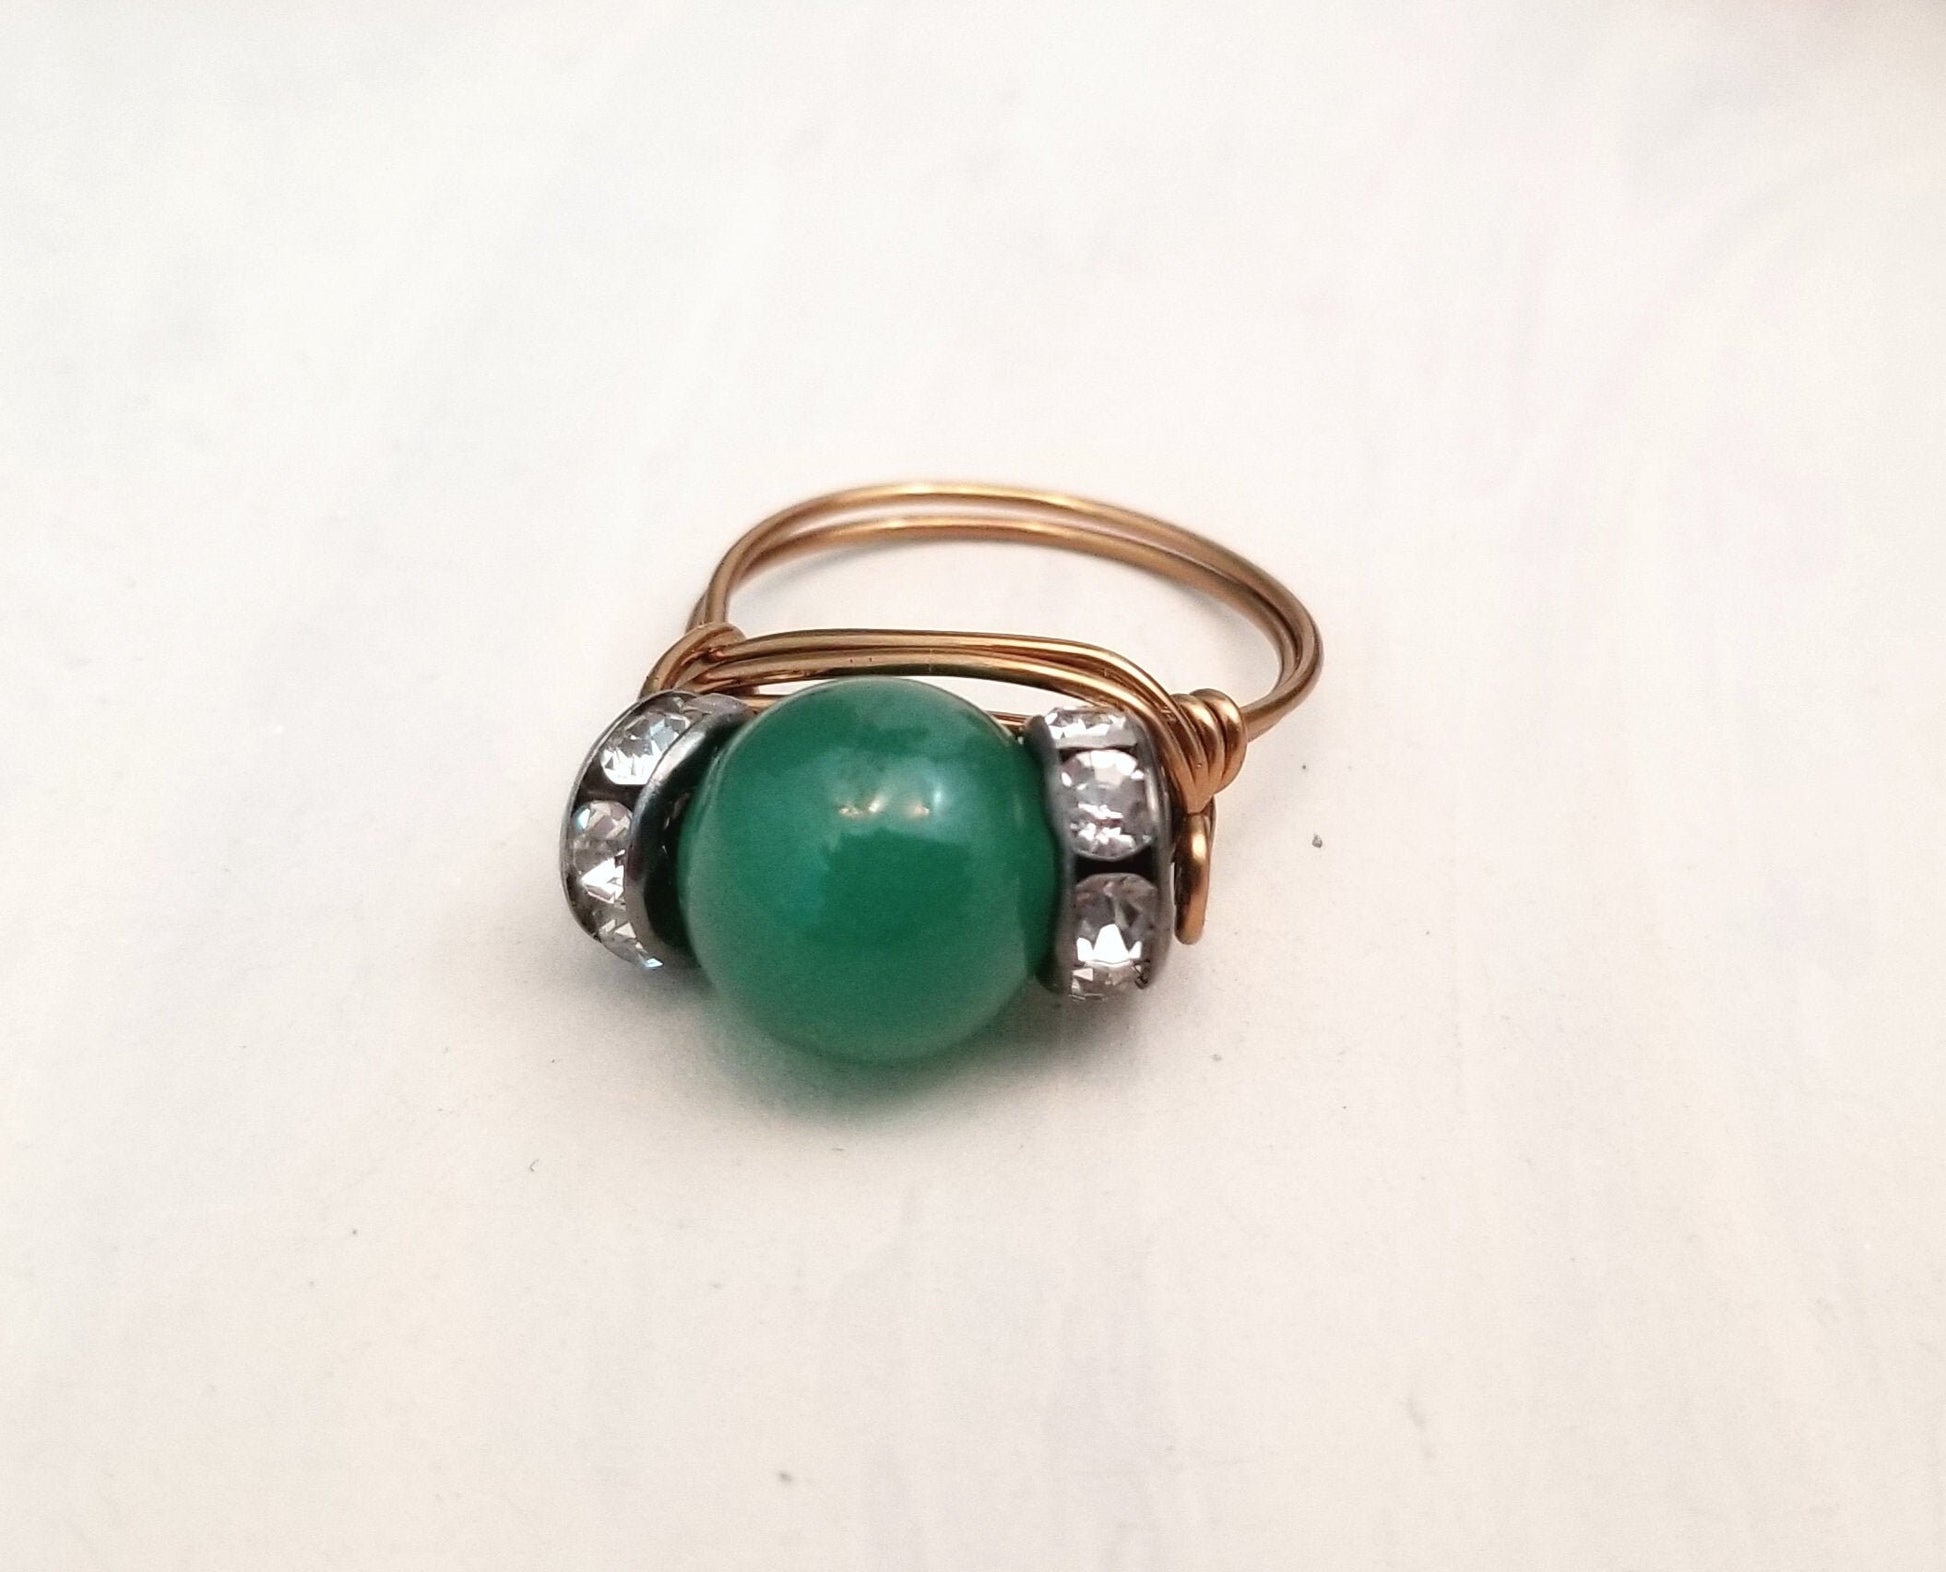 Wire Ring in Green Jade with Rhinestones, Fairy Tale, Renaissance, Medieval, Choice of Colors and Metals